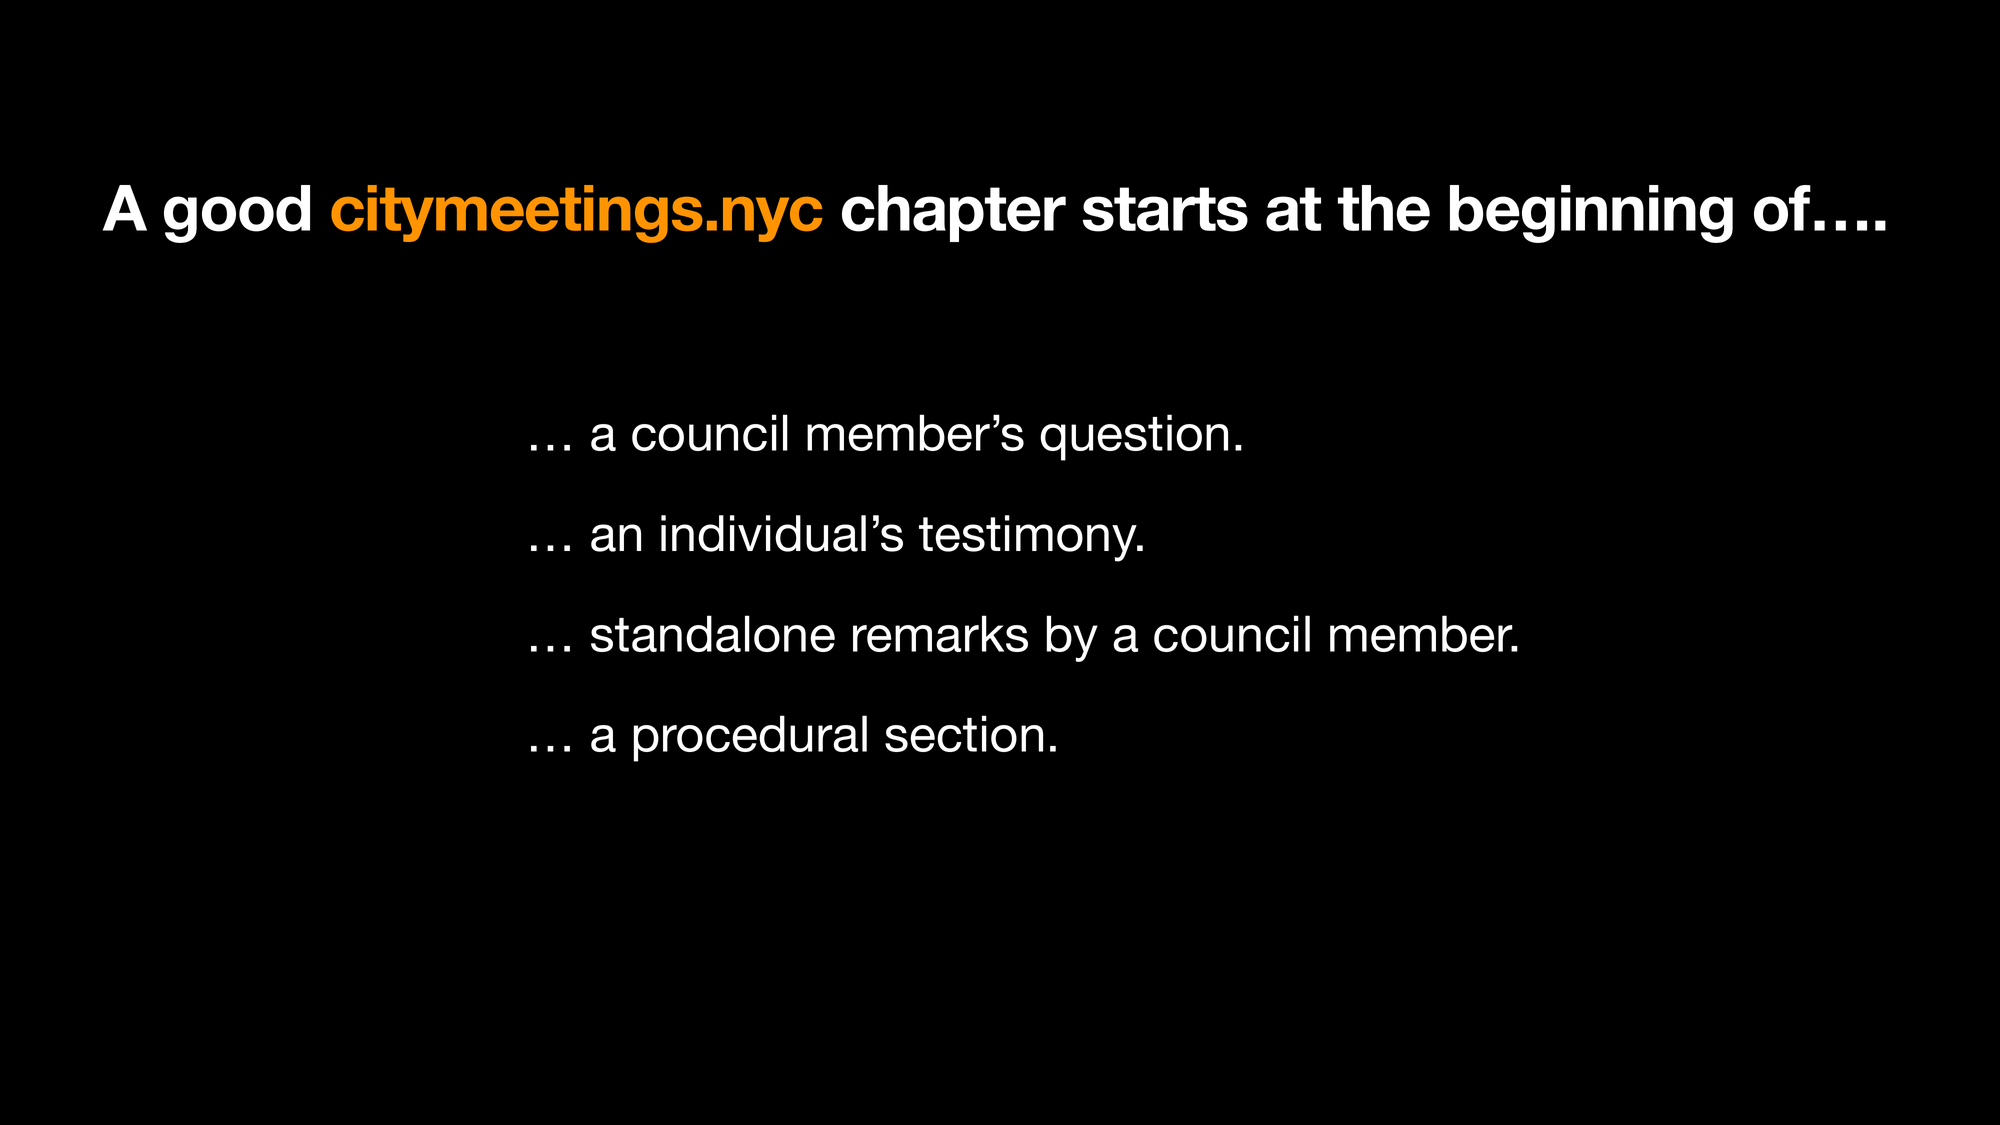 A good citymeetings.nyc chapter starts at the beginning of: a council member’s question, an individual’s testimony, standalone remarks by a council member, a procedural section.
